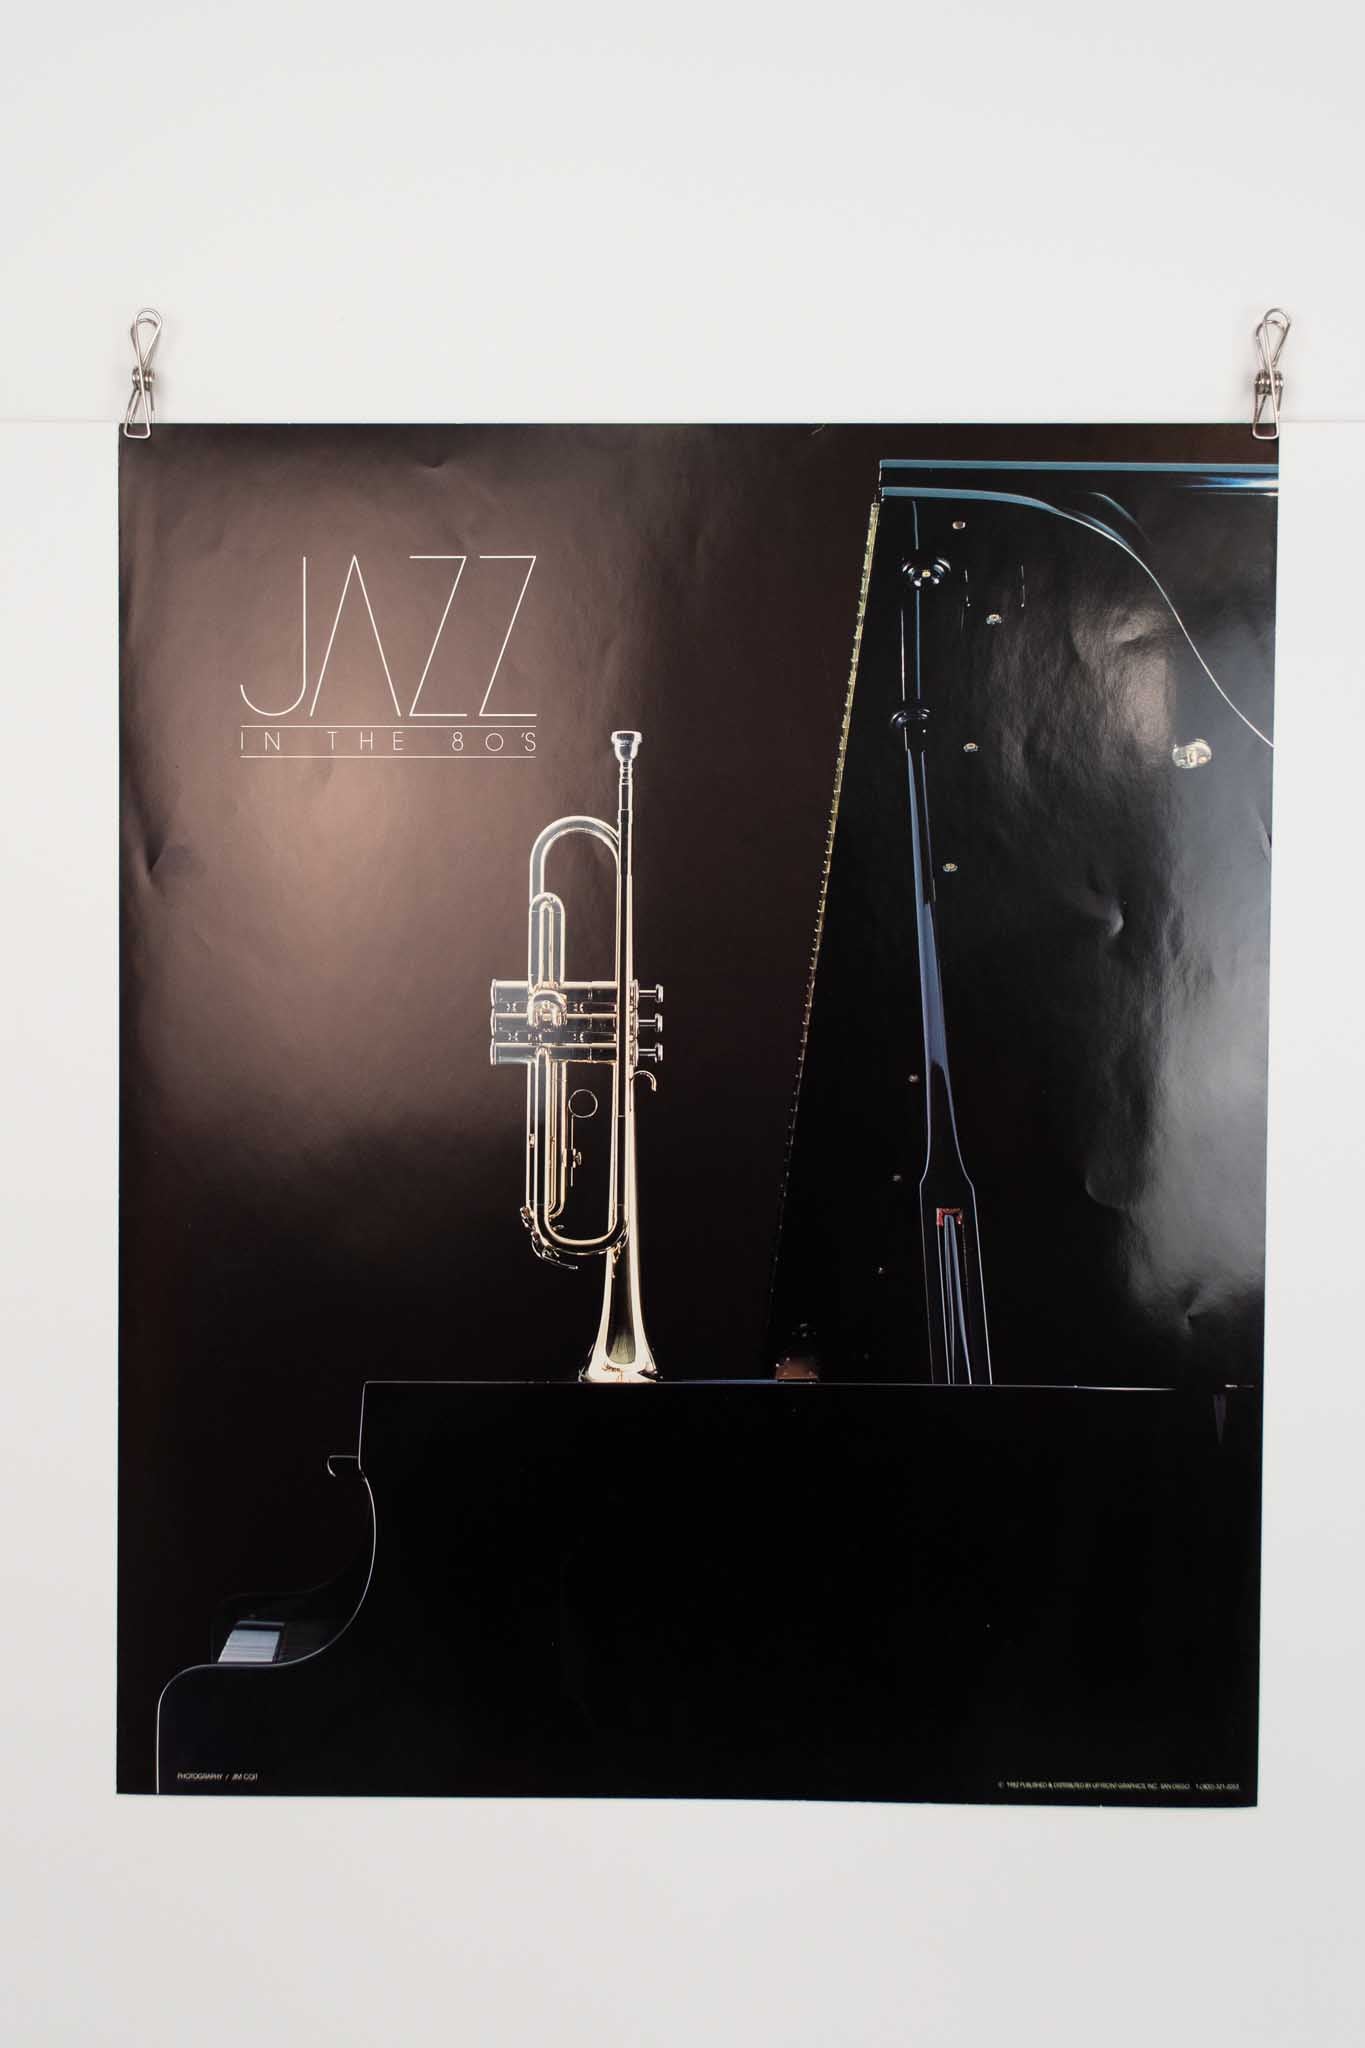 Jim Coit "Jazz in the 80's" Print